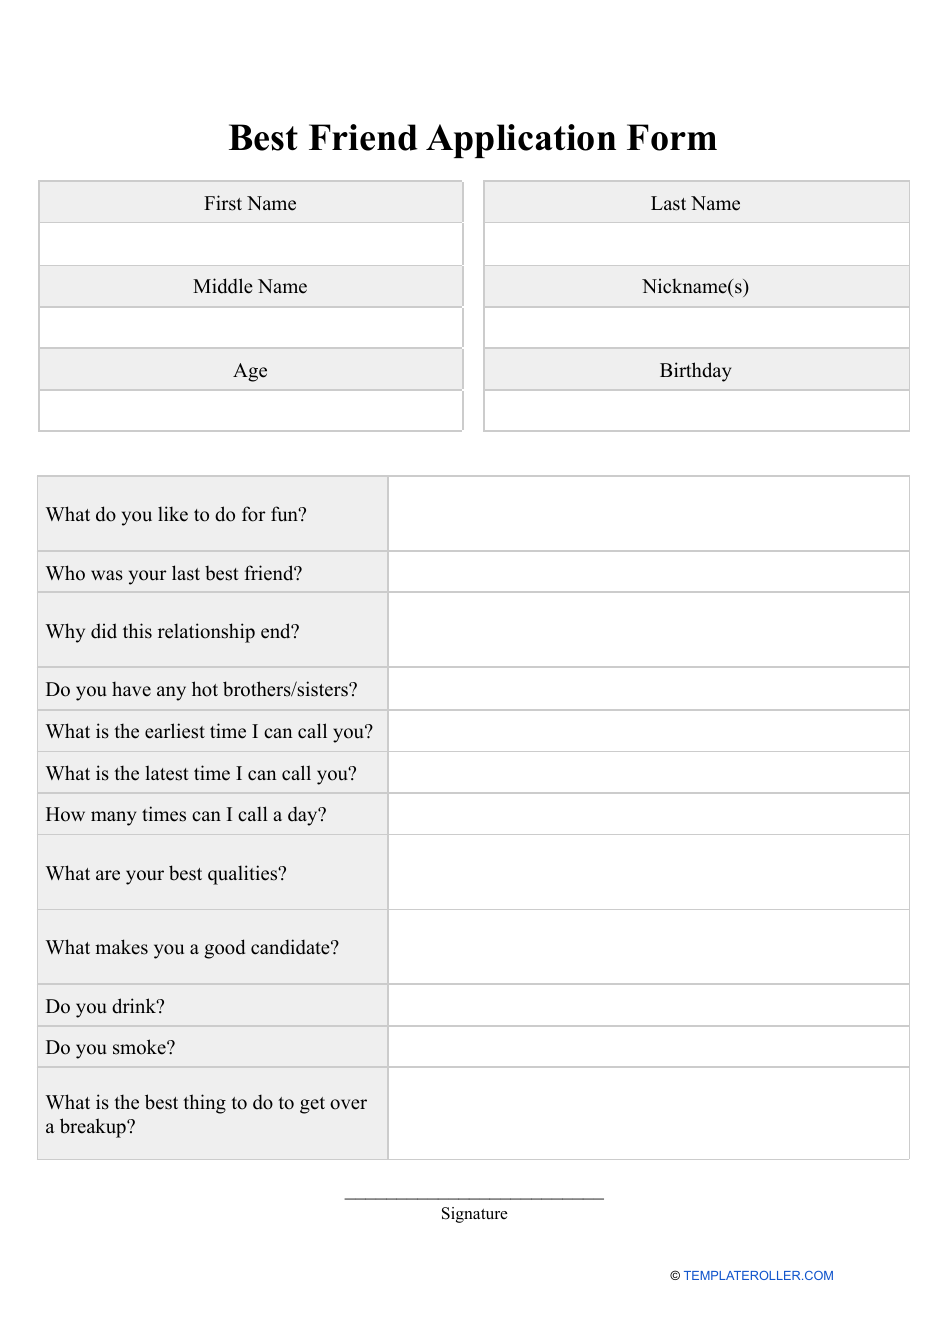 FREE Printable and Editable Best Friend Application